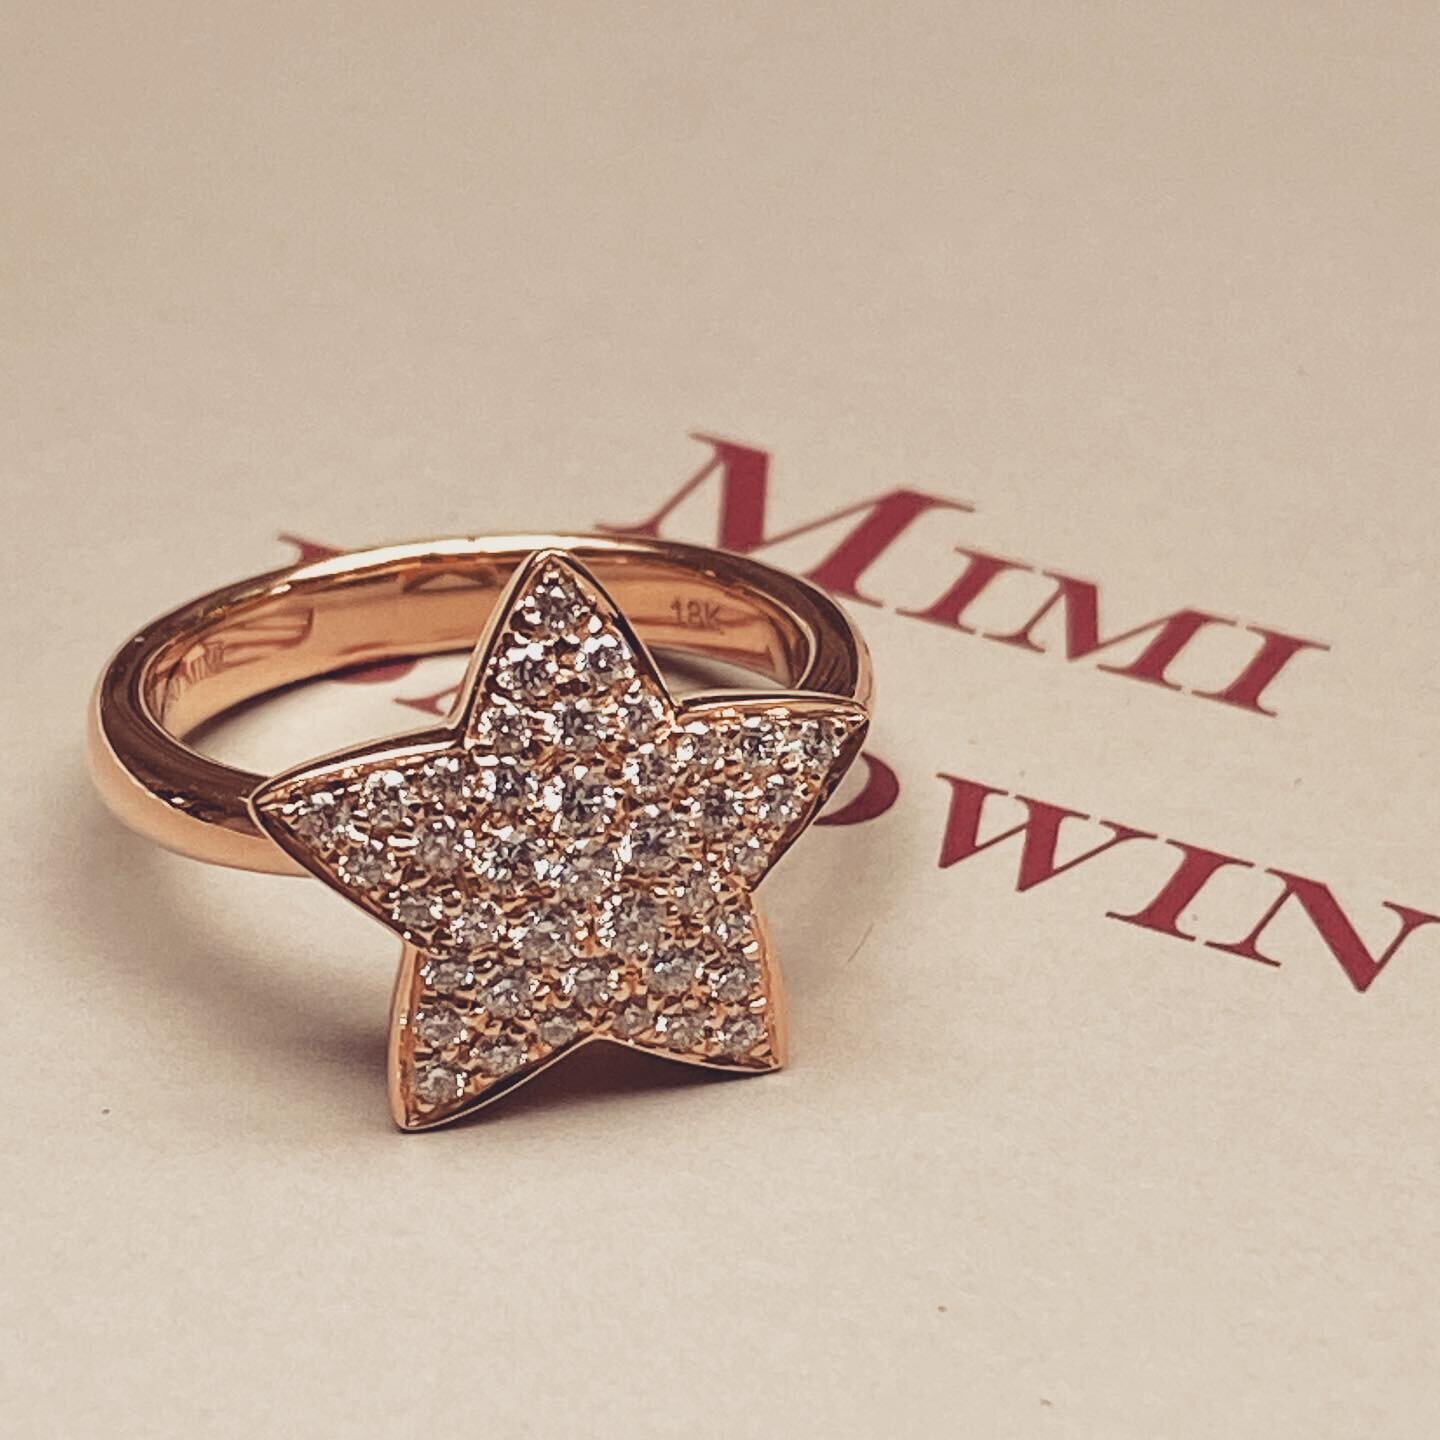 The Signature Star 🌟 Ring has always been one of my favourite pieces #mimibaldwinjewellery✨